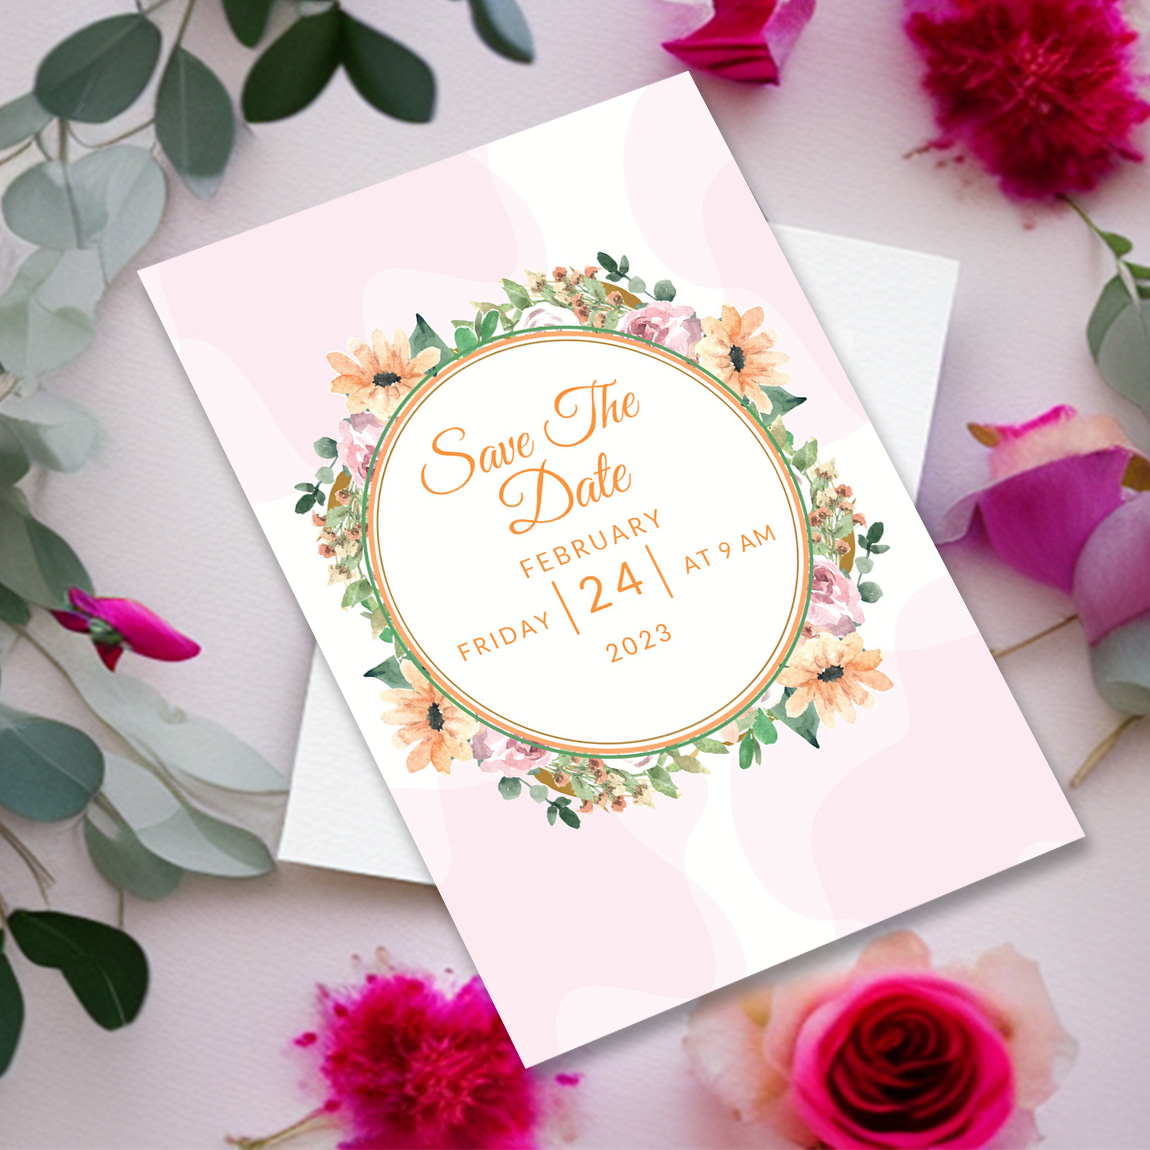 Image with amazing wedding invitation with floral decor.